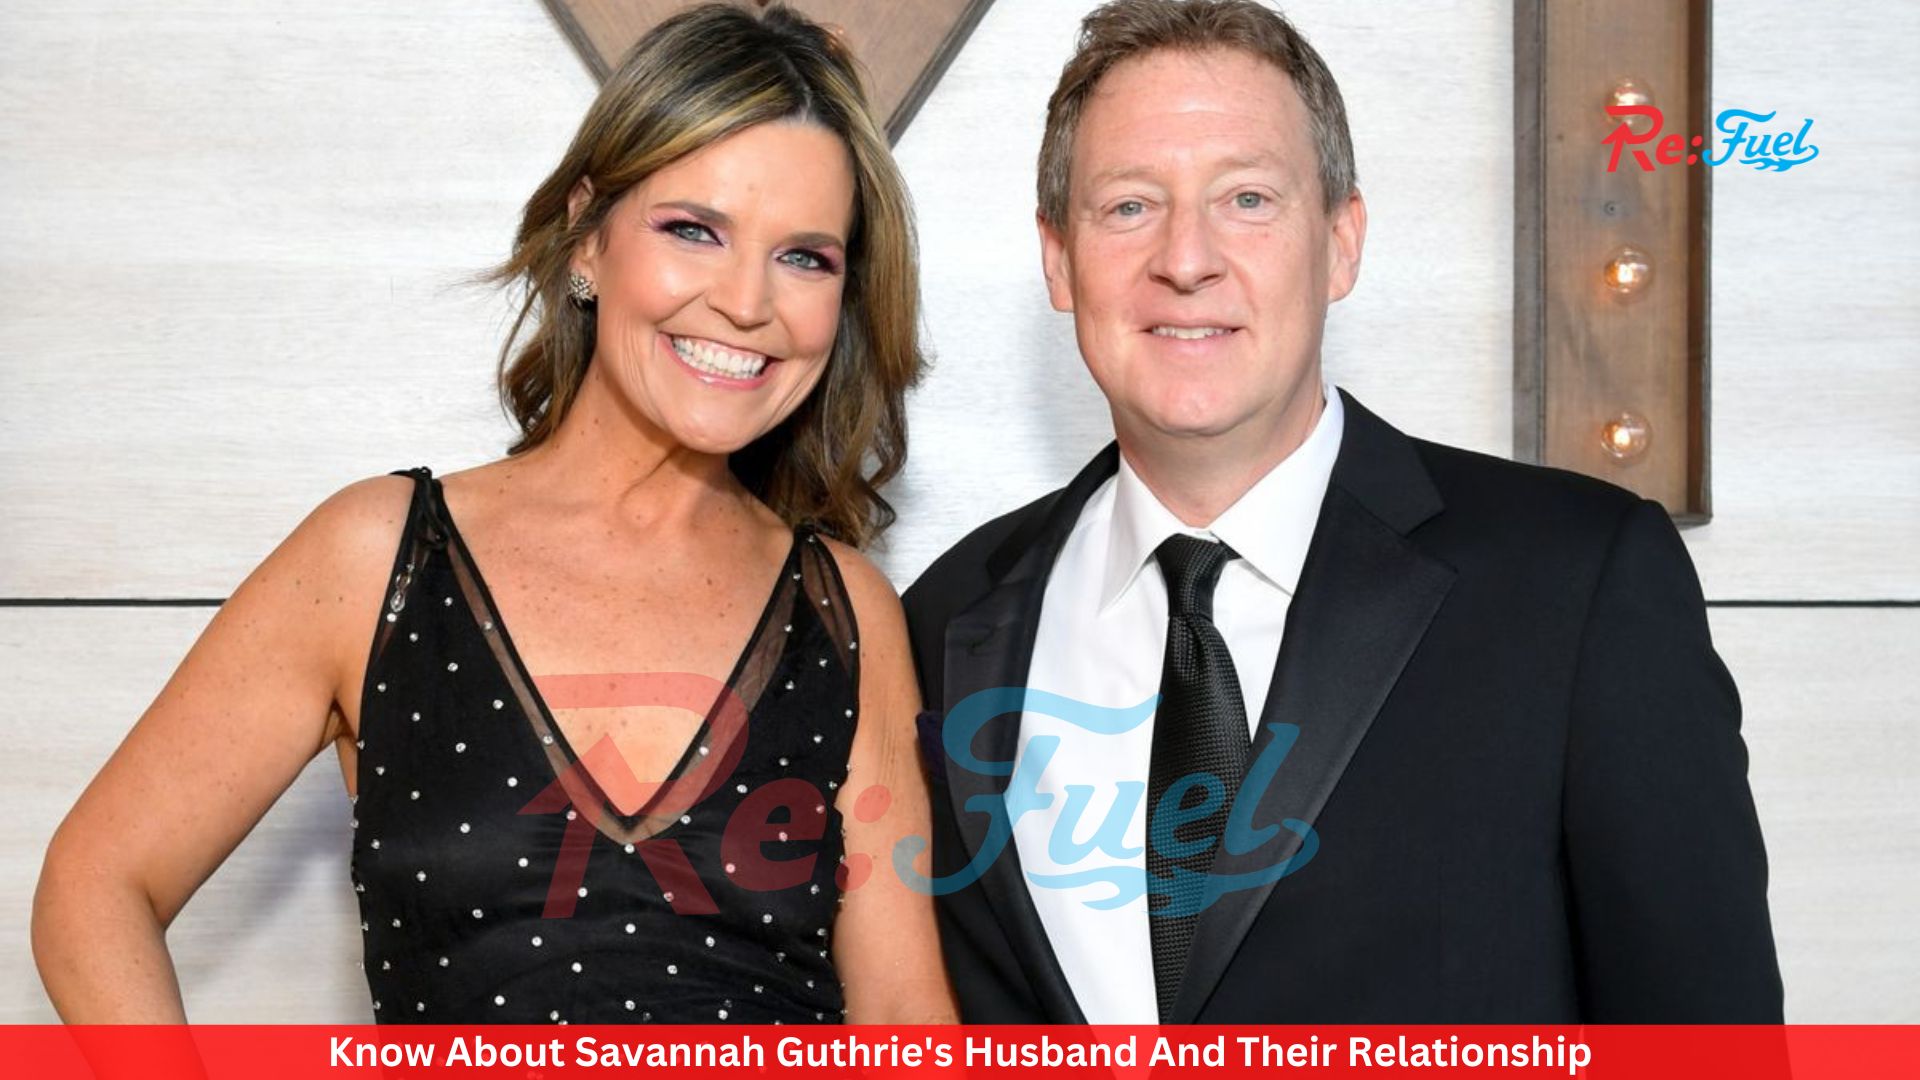 Know About Savannah Guthrie's Husband And Their Relationship